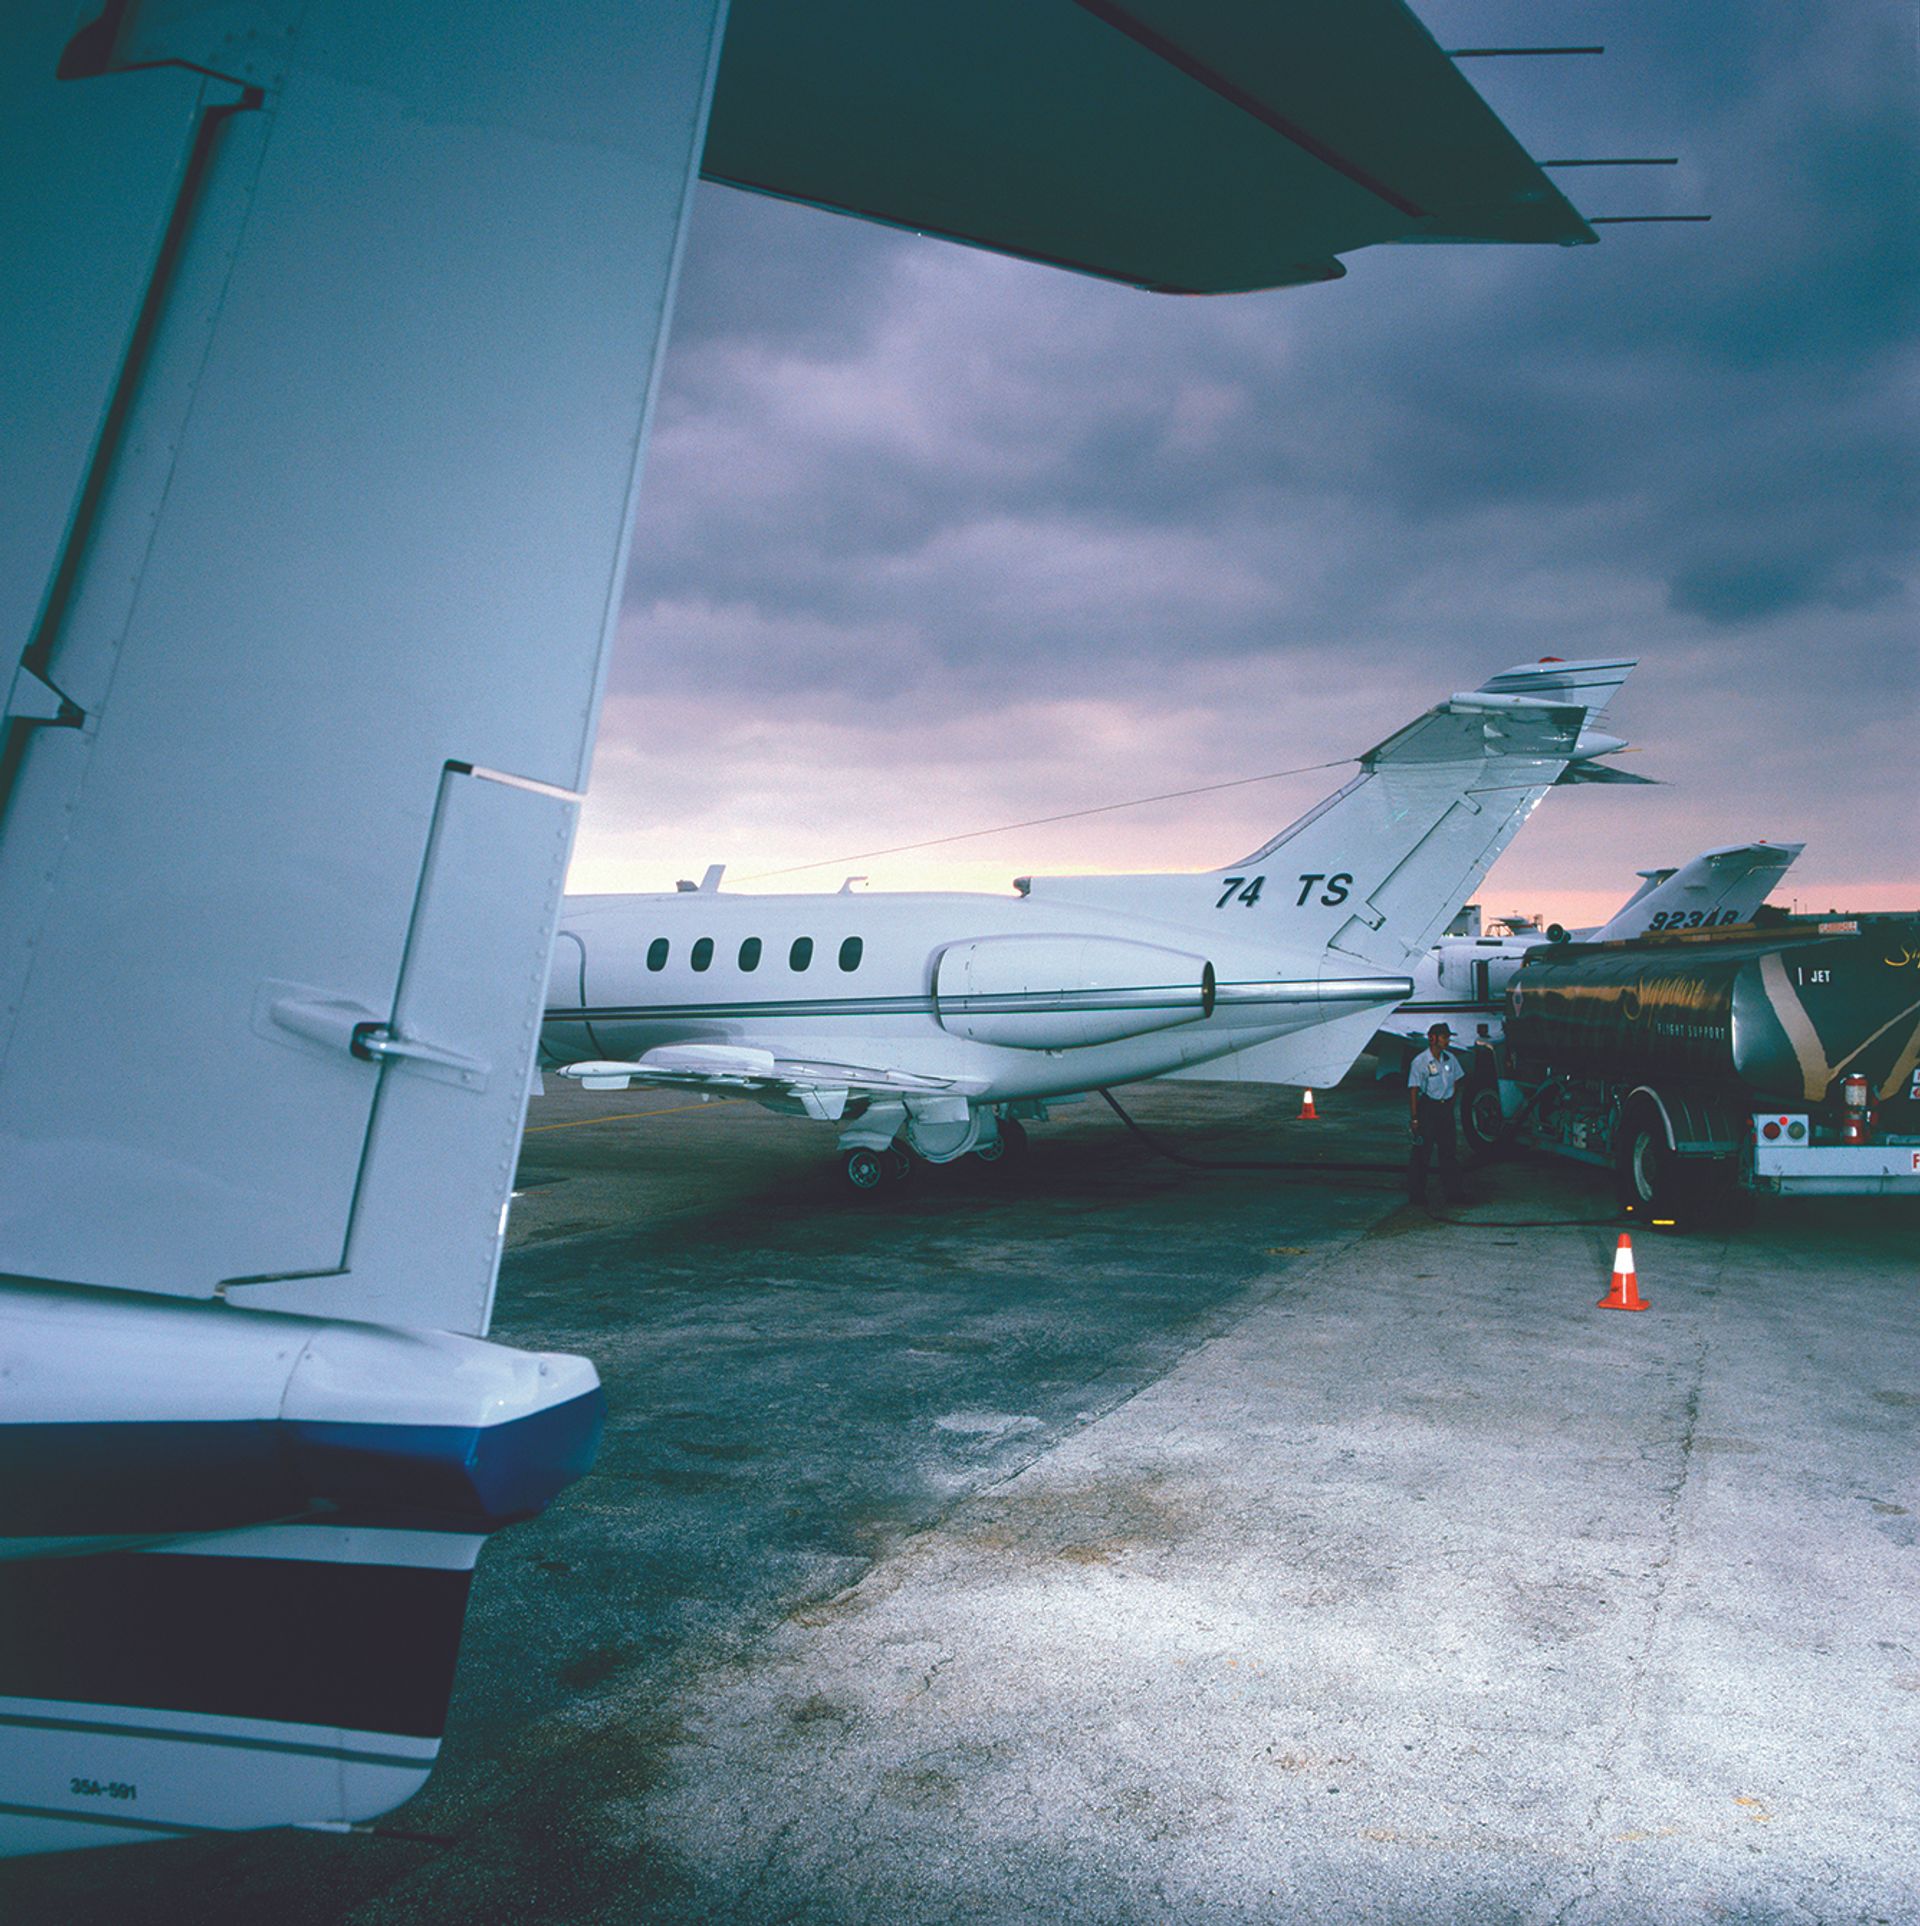 Private jets lined up in Miami. According to New York critic Jerry Saltz, the art world is ‘probably one of the greatest carbon burning industries of its size anywhere on earth’

Photo: Avalon/Construction Photography/Alamy Stock Photo